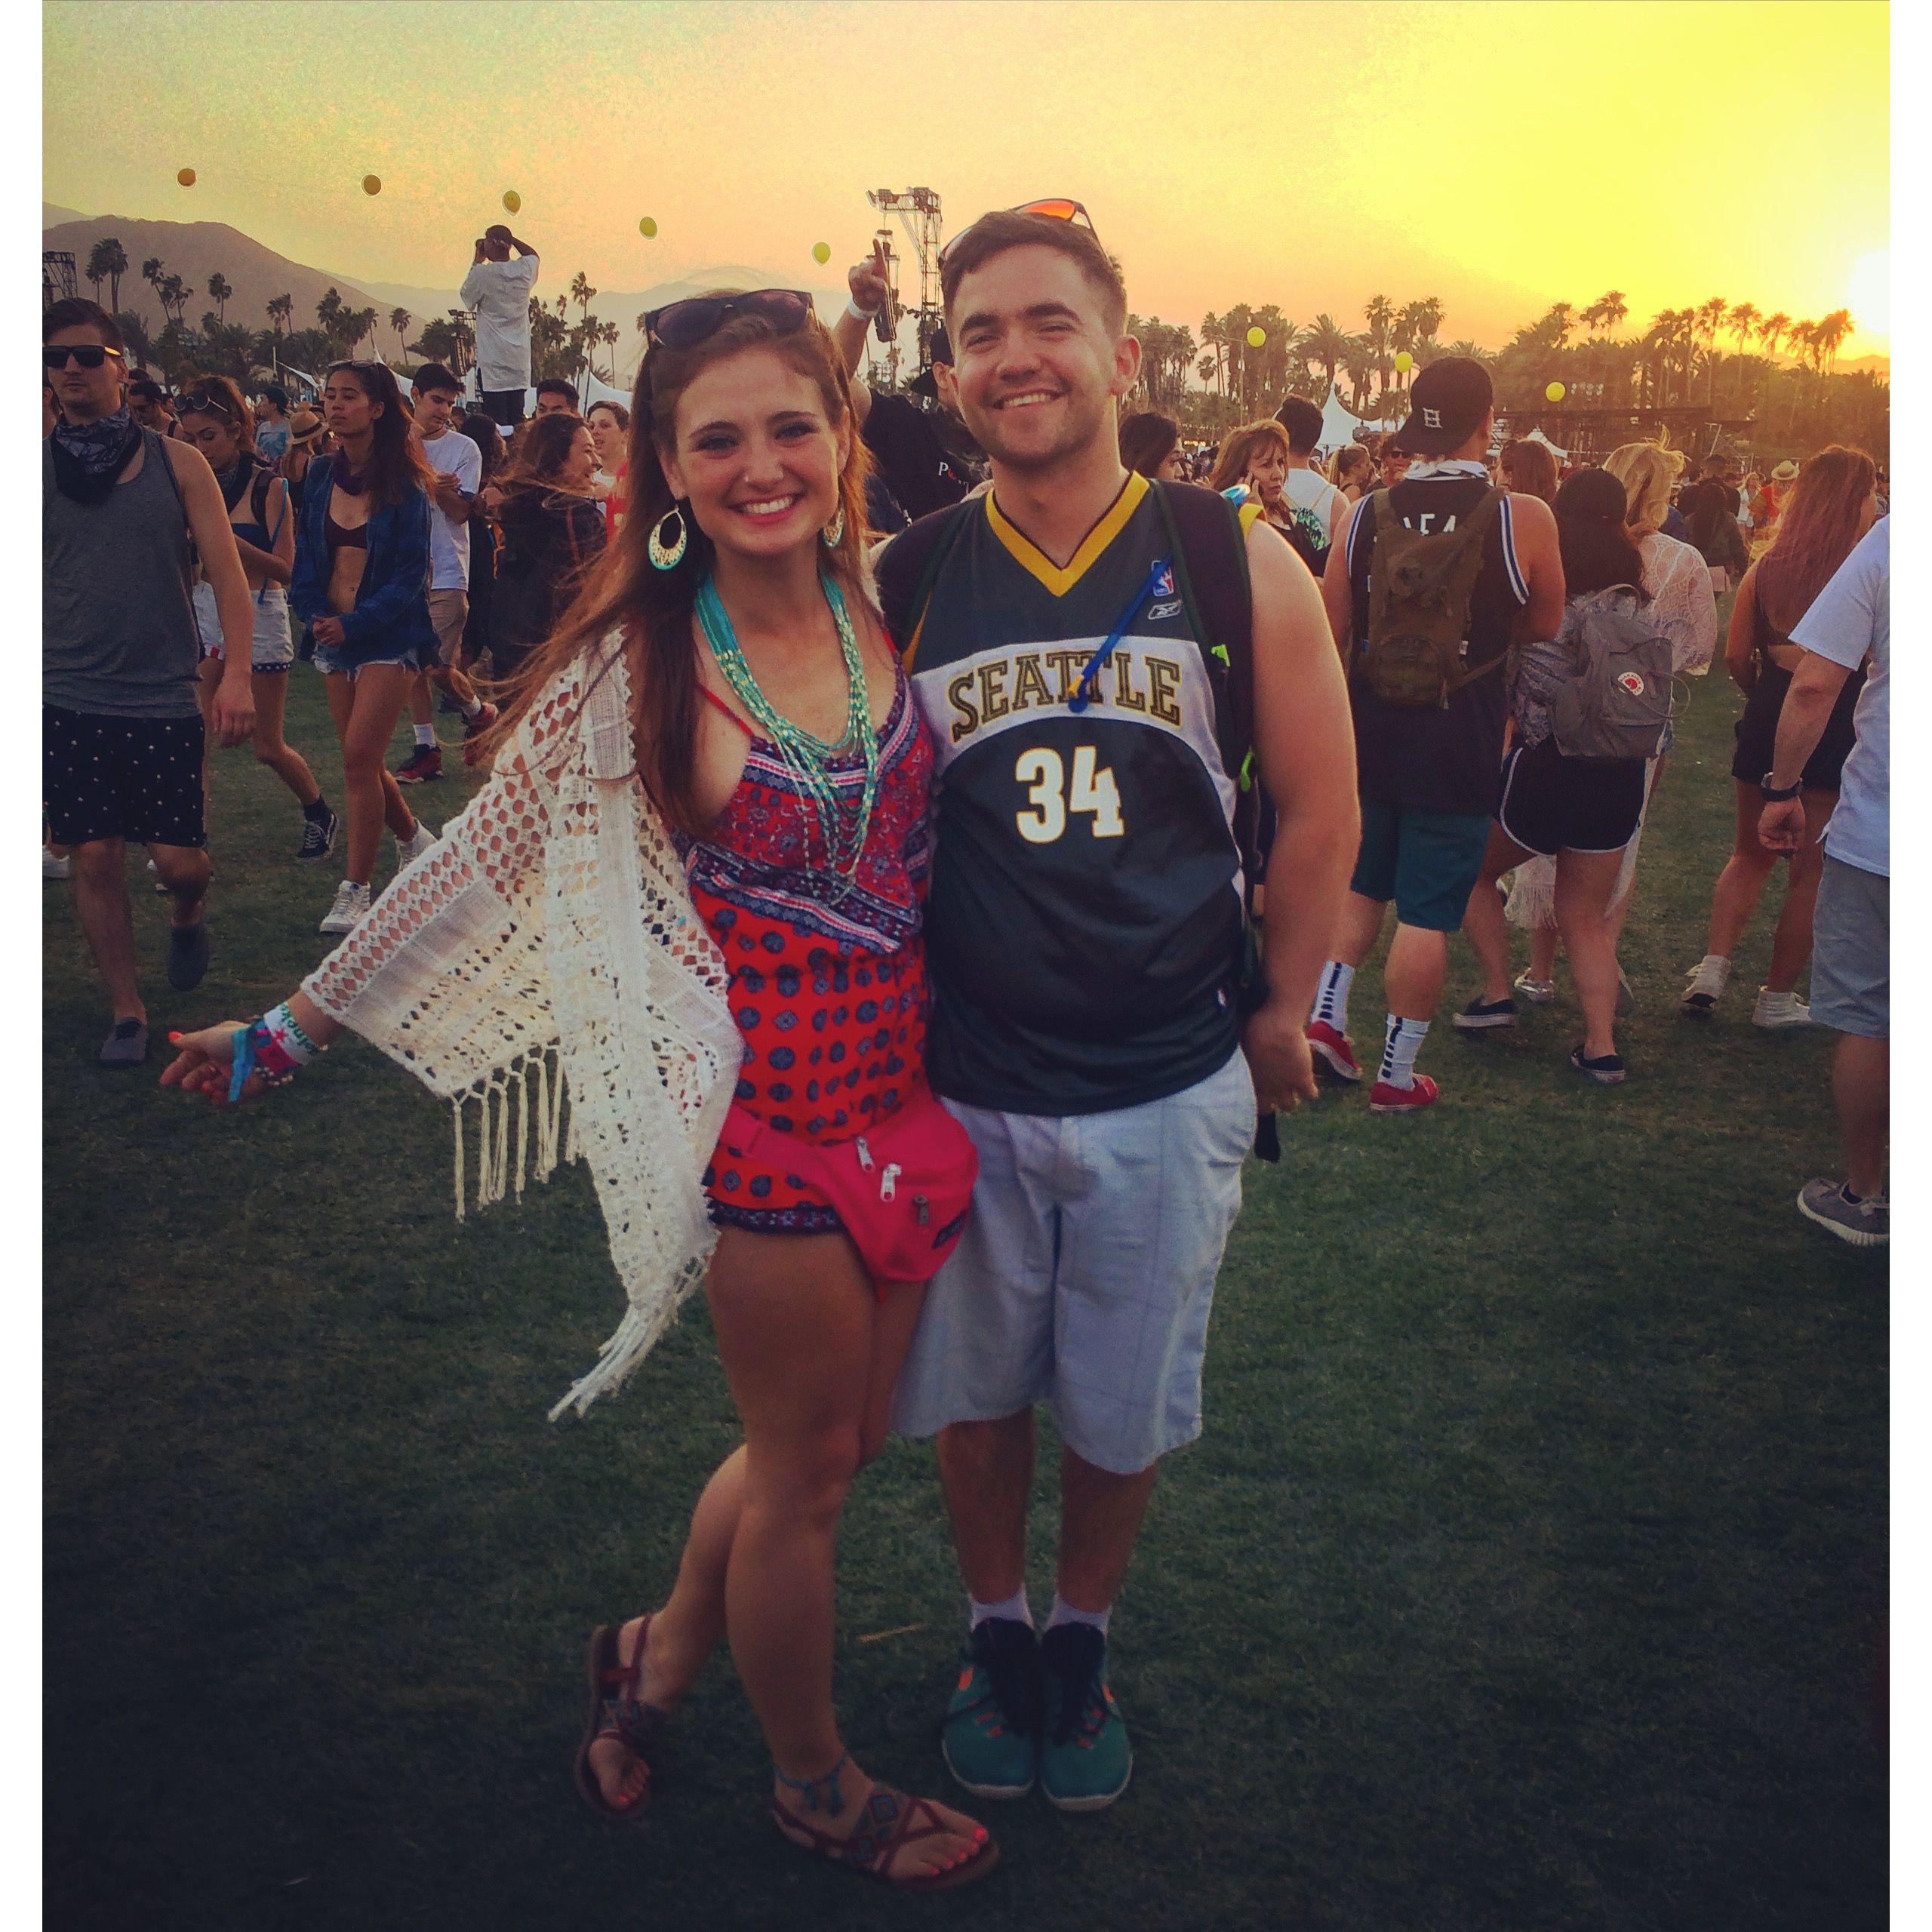 Our first Coachella together, 2016